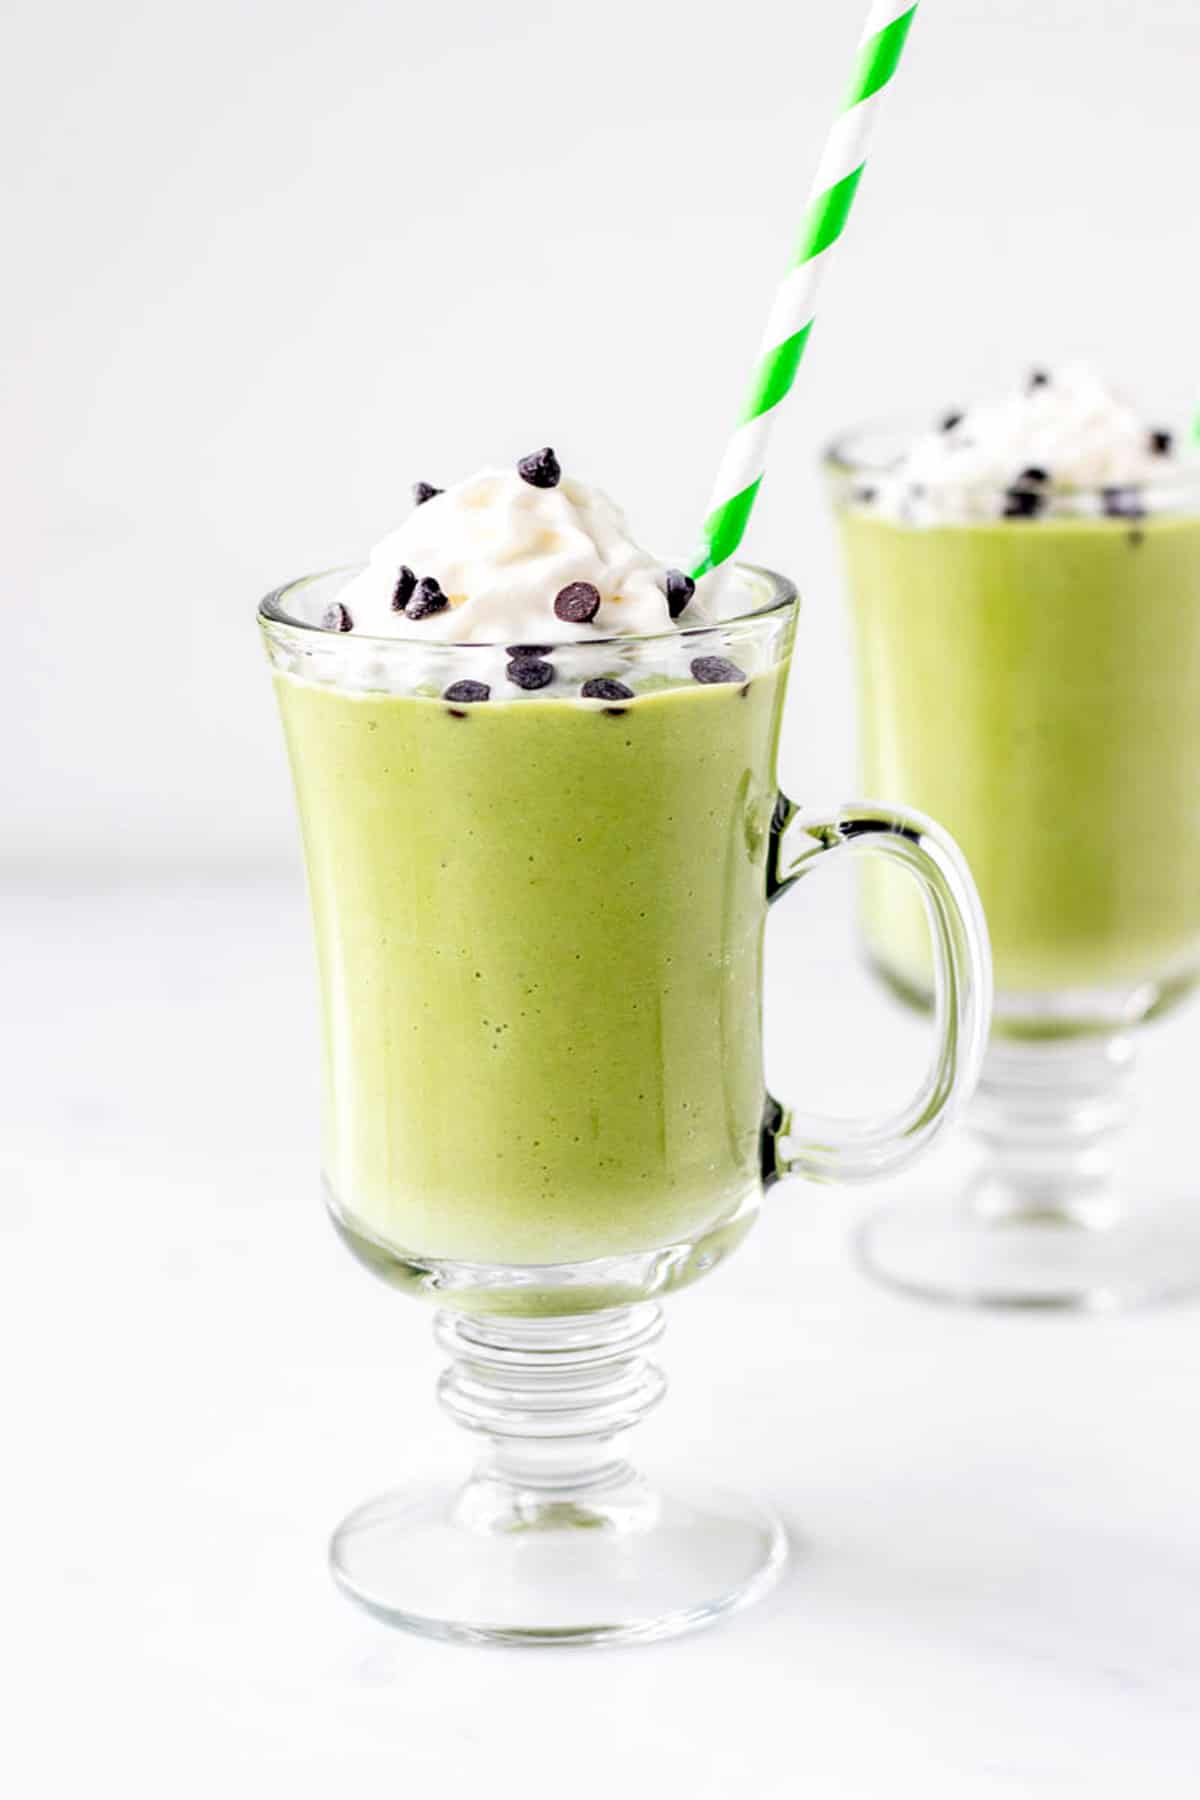 Close up image of a healthy shamrock shake topped with whip cream and chocolate chips.